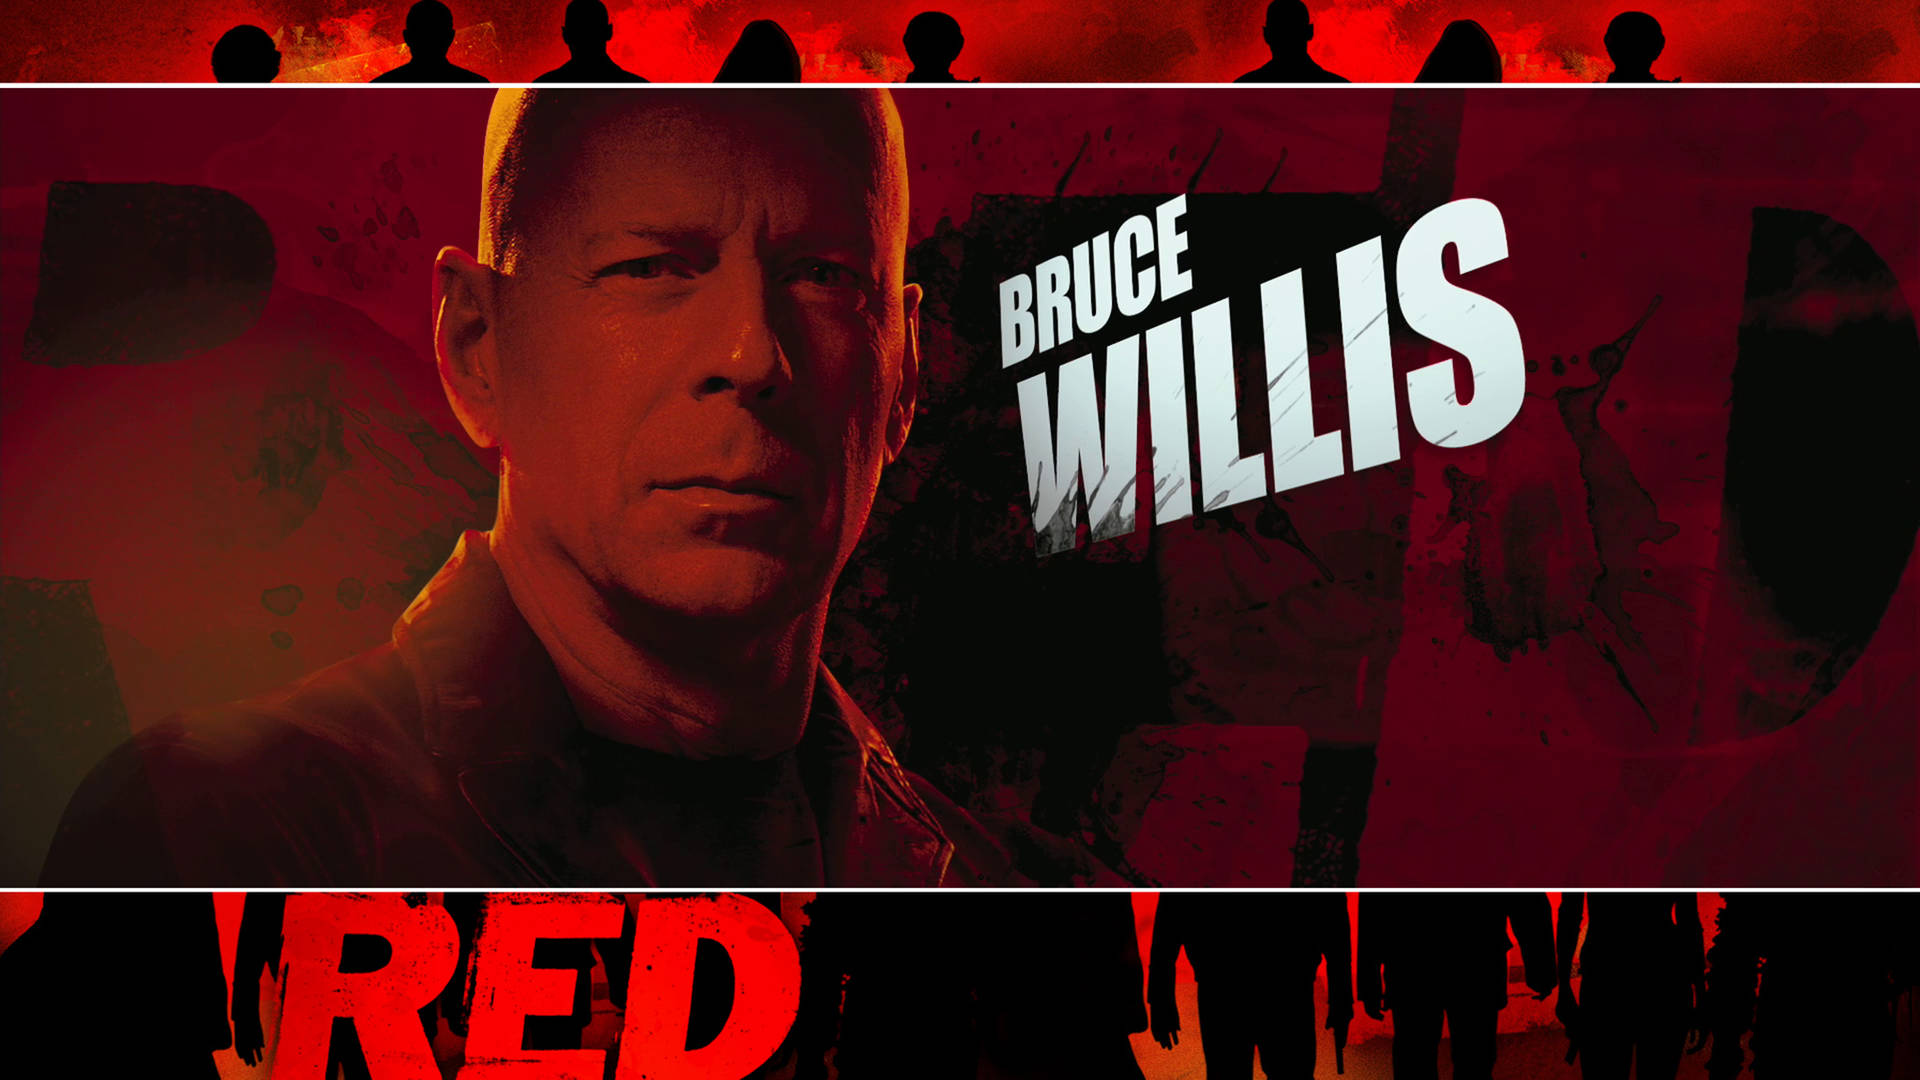 Bruce Willis Red Aesthetic Background